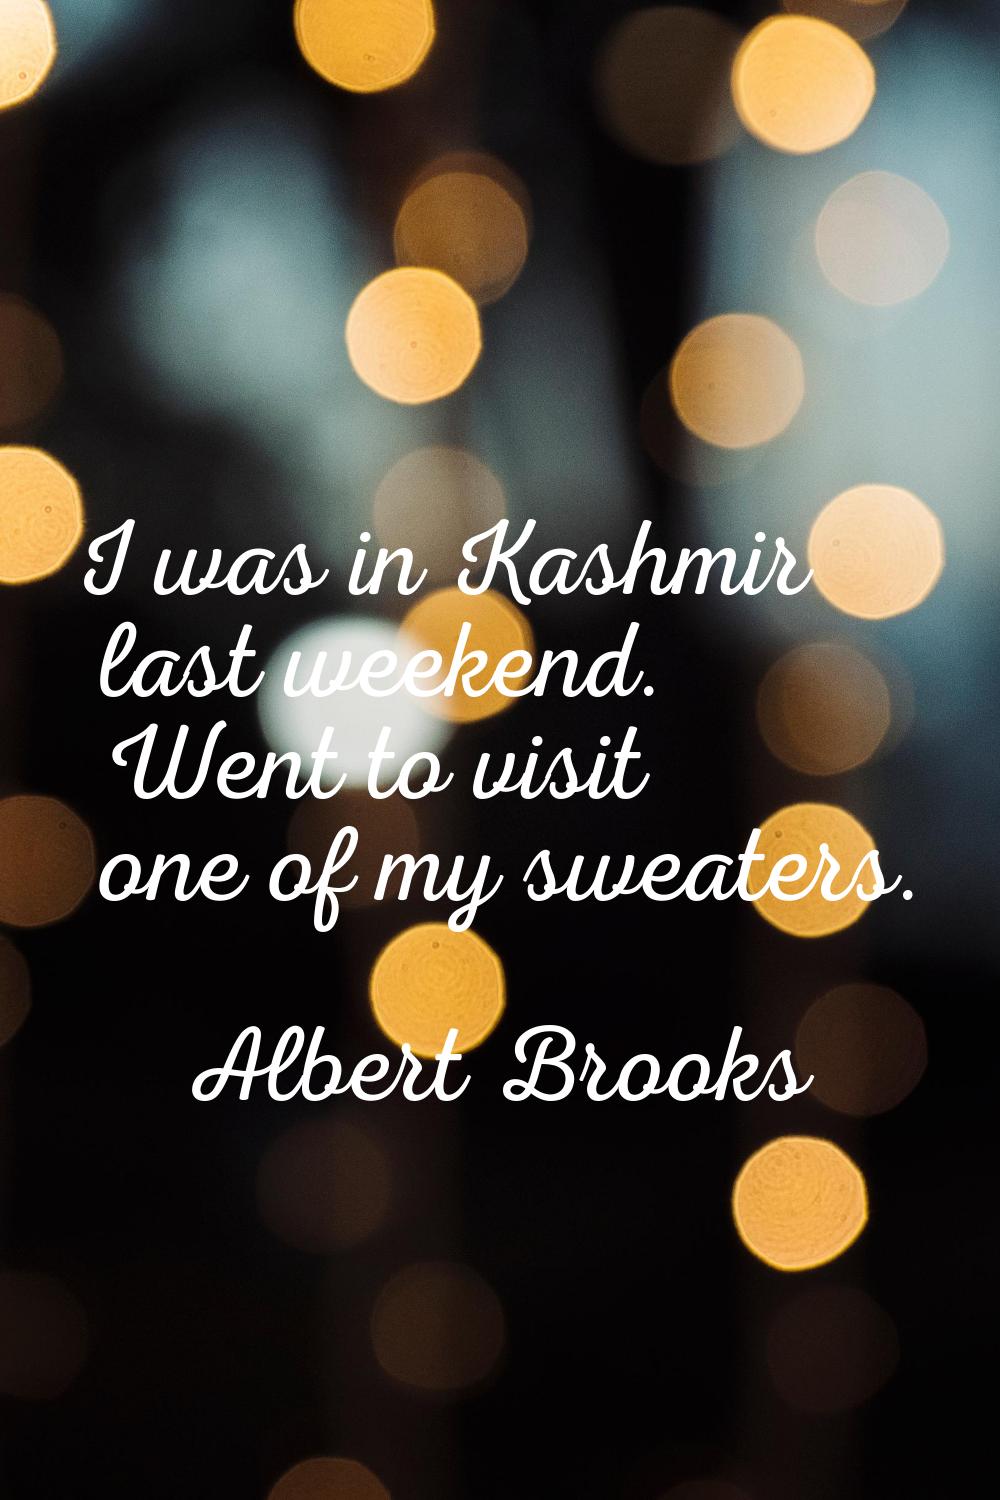 I was in Kashmir last weekend. Went to visit one of my sweaters.